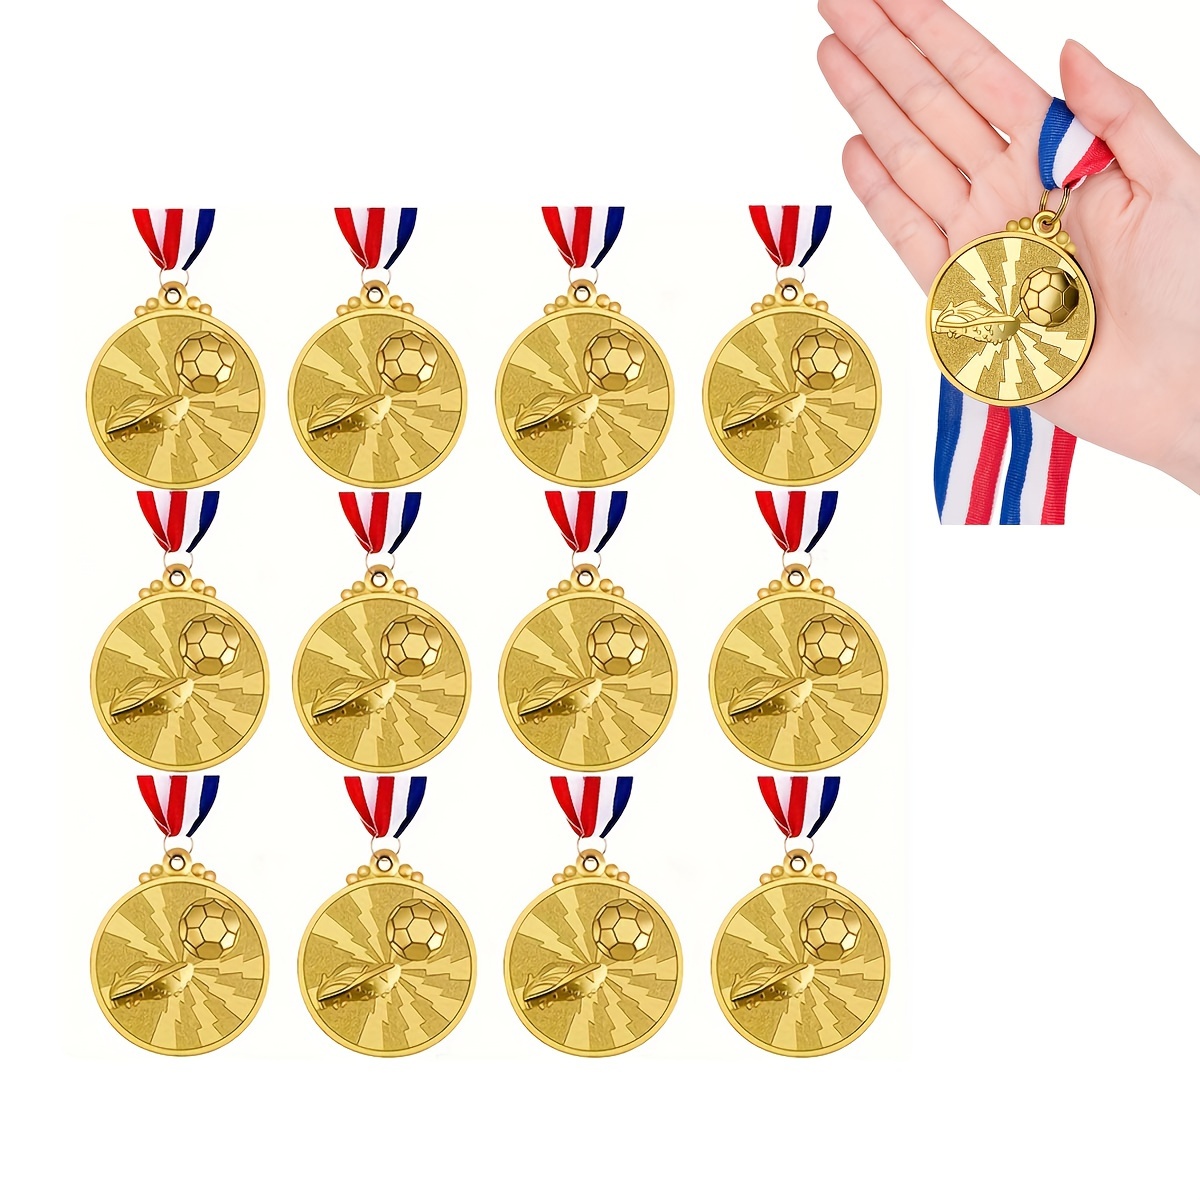 

12-pack Premium Soccer Medals - Perfect For Tournaments, School Sports & Club Competitions | Durable Metal Design To Celebrate Achievements